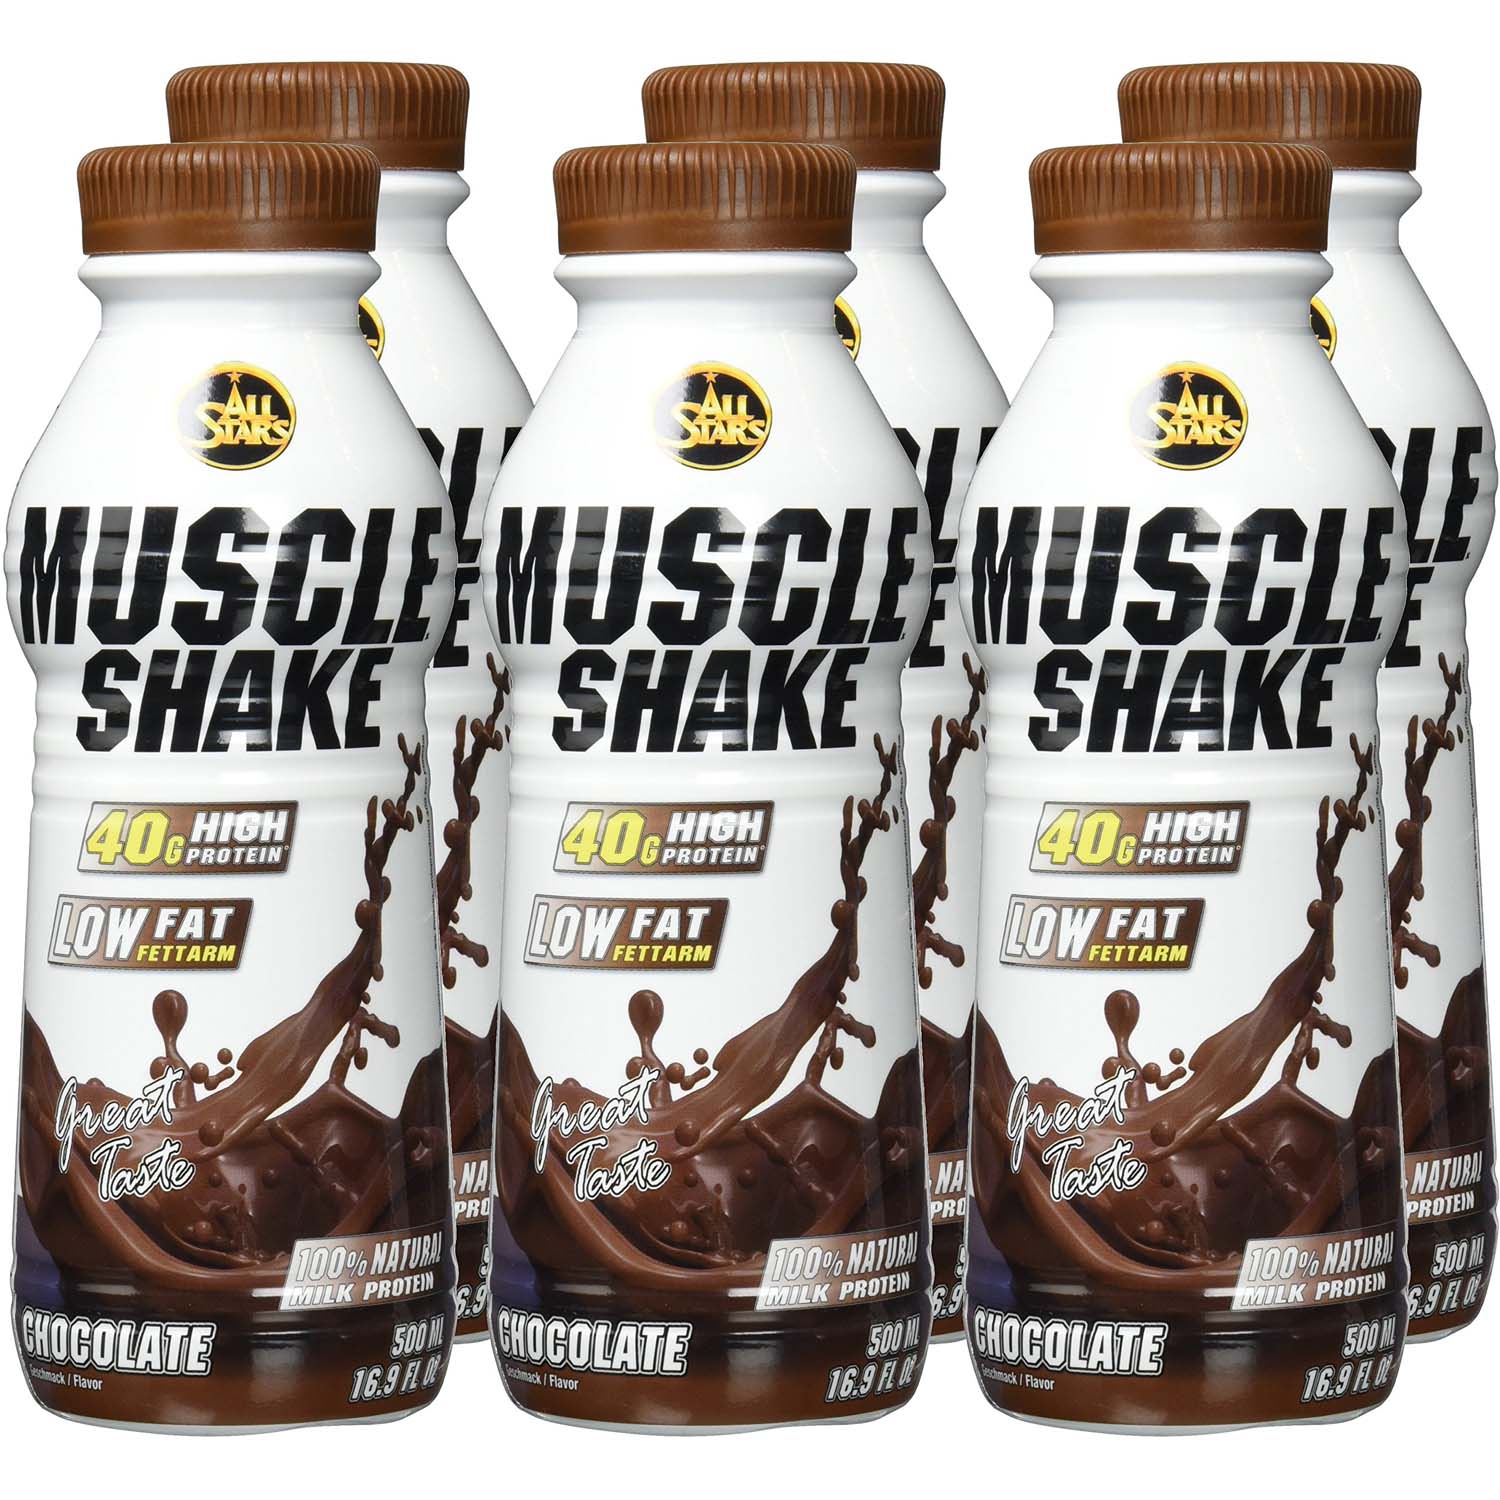 All Stars Protein Muscle Shake, Milk Chocolate, Box of 6 Pieces